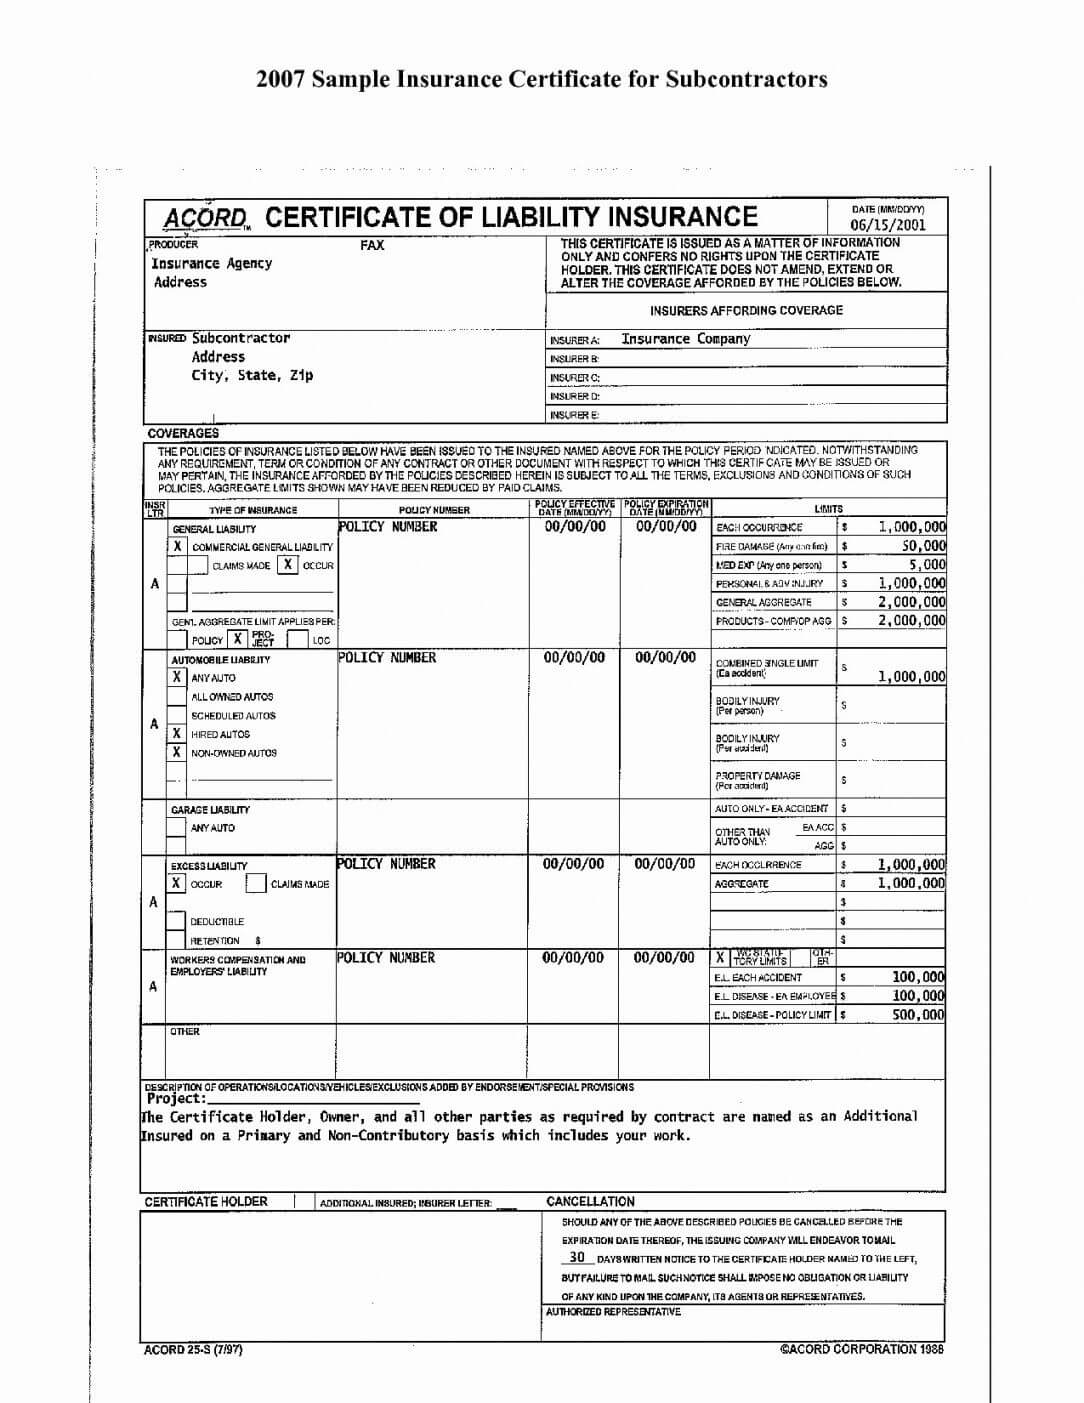 Editable Form Ificate Of Liability Insurance What Is Throughout Acord Insurance Certificate Template